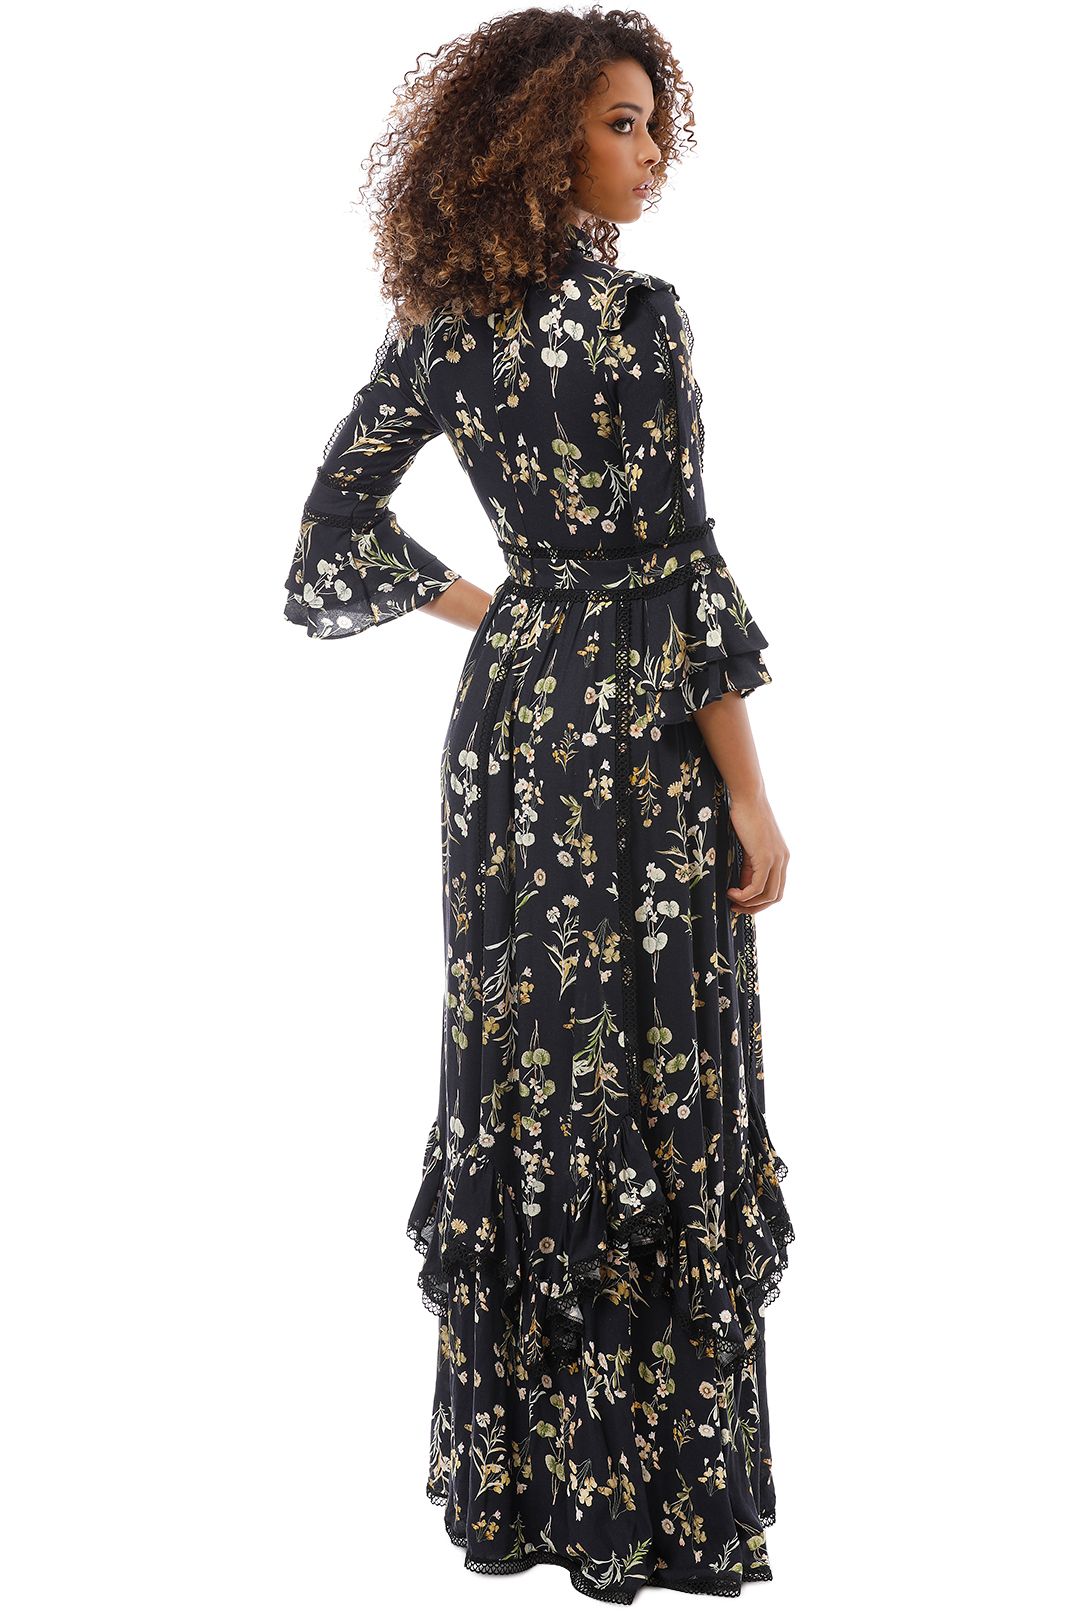 Black Botanica Maxi Dress by We Are Kindred for Hire